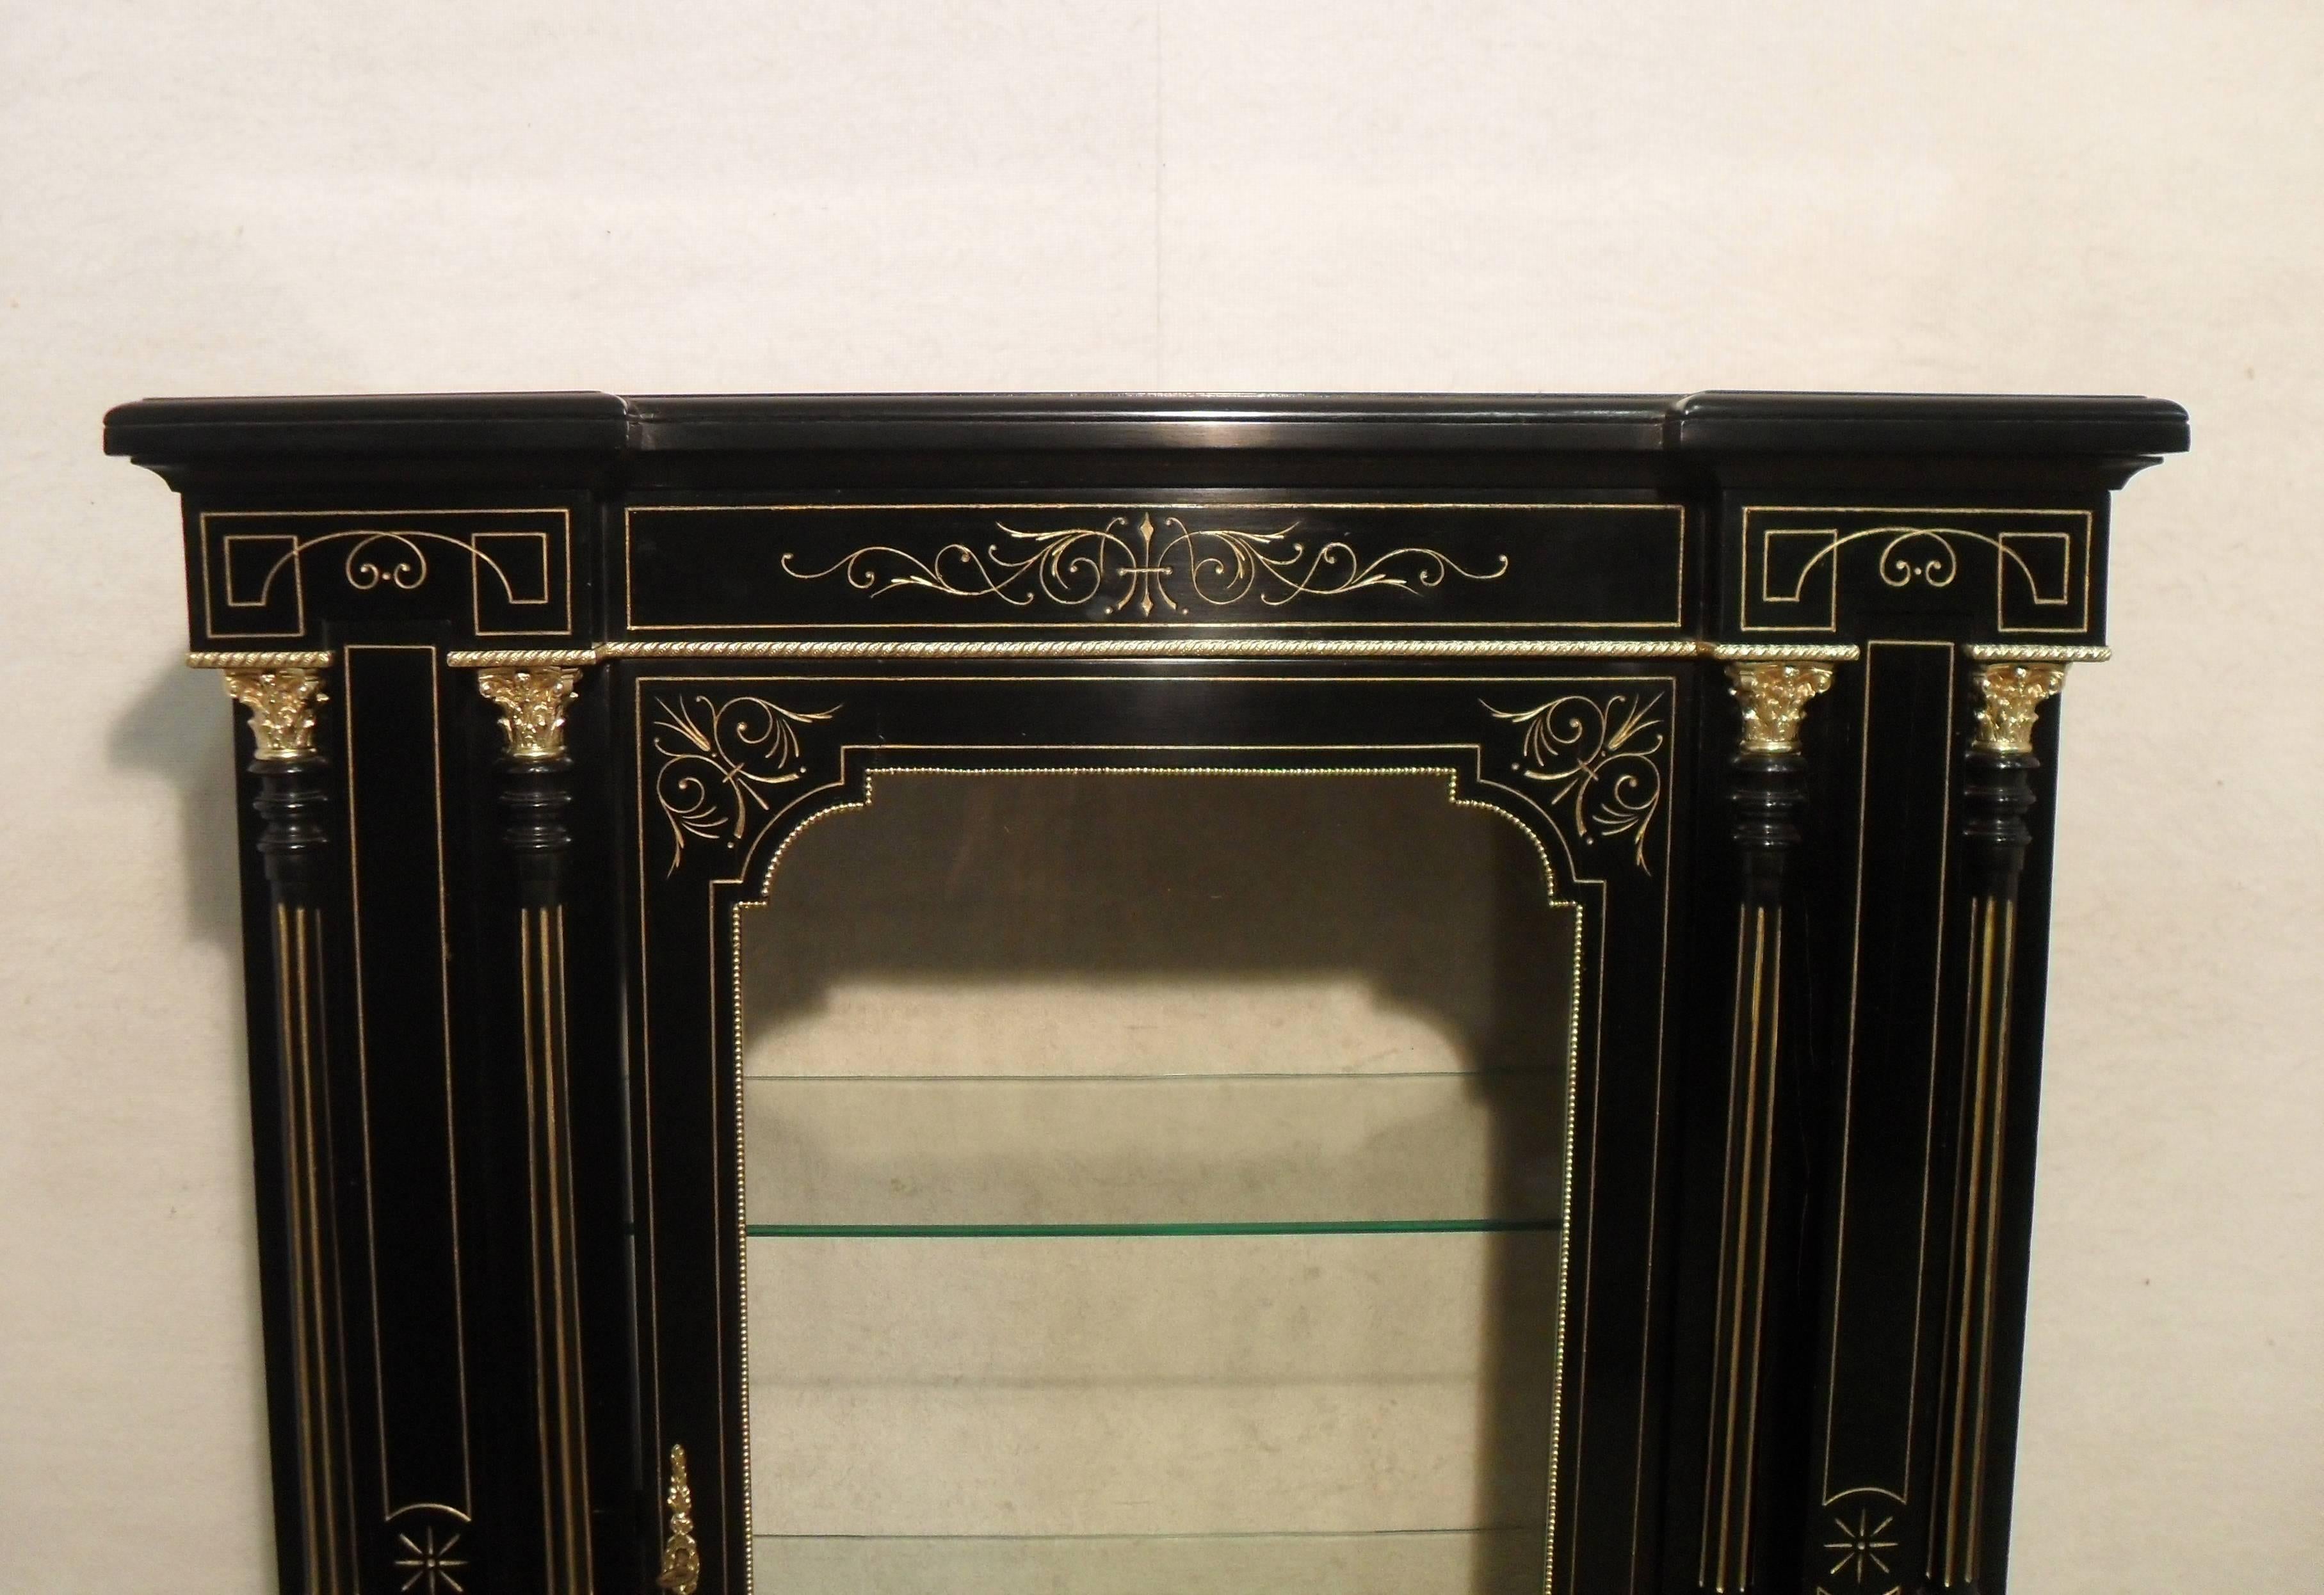 English Pair of Victorian Aesthetic Movement Ebonized Display Cabinets or Bookcases